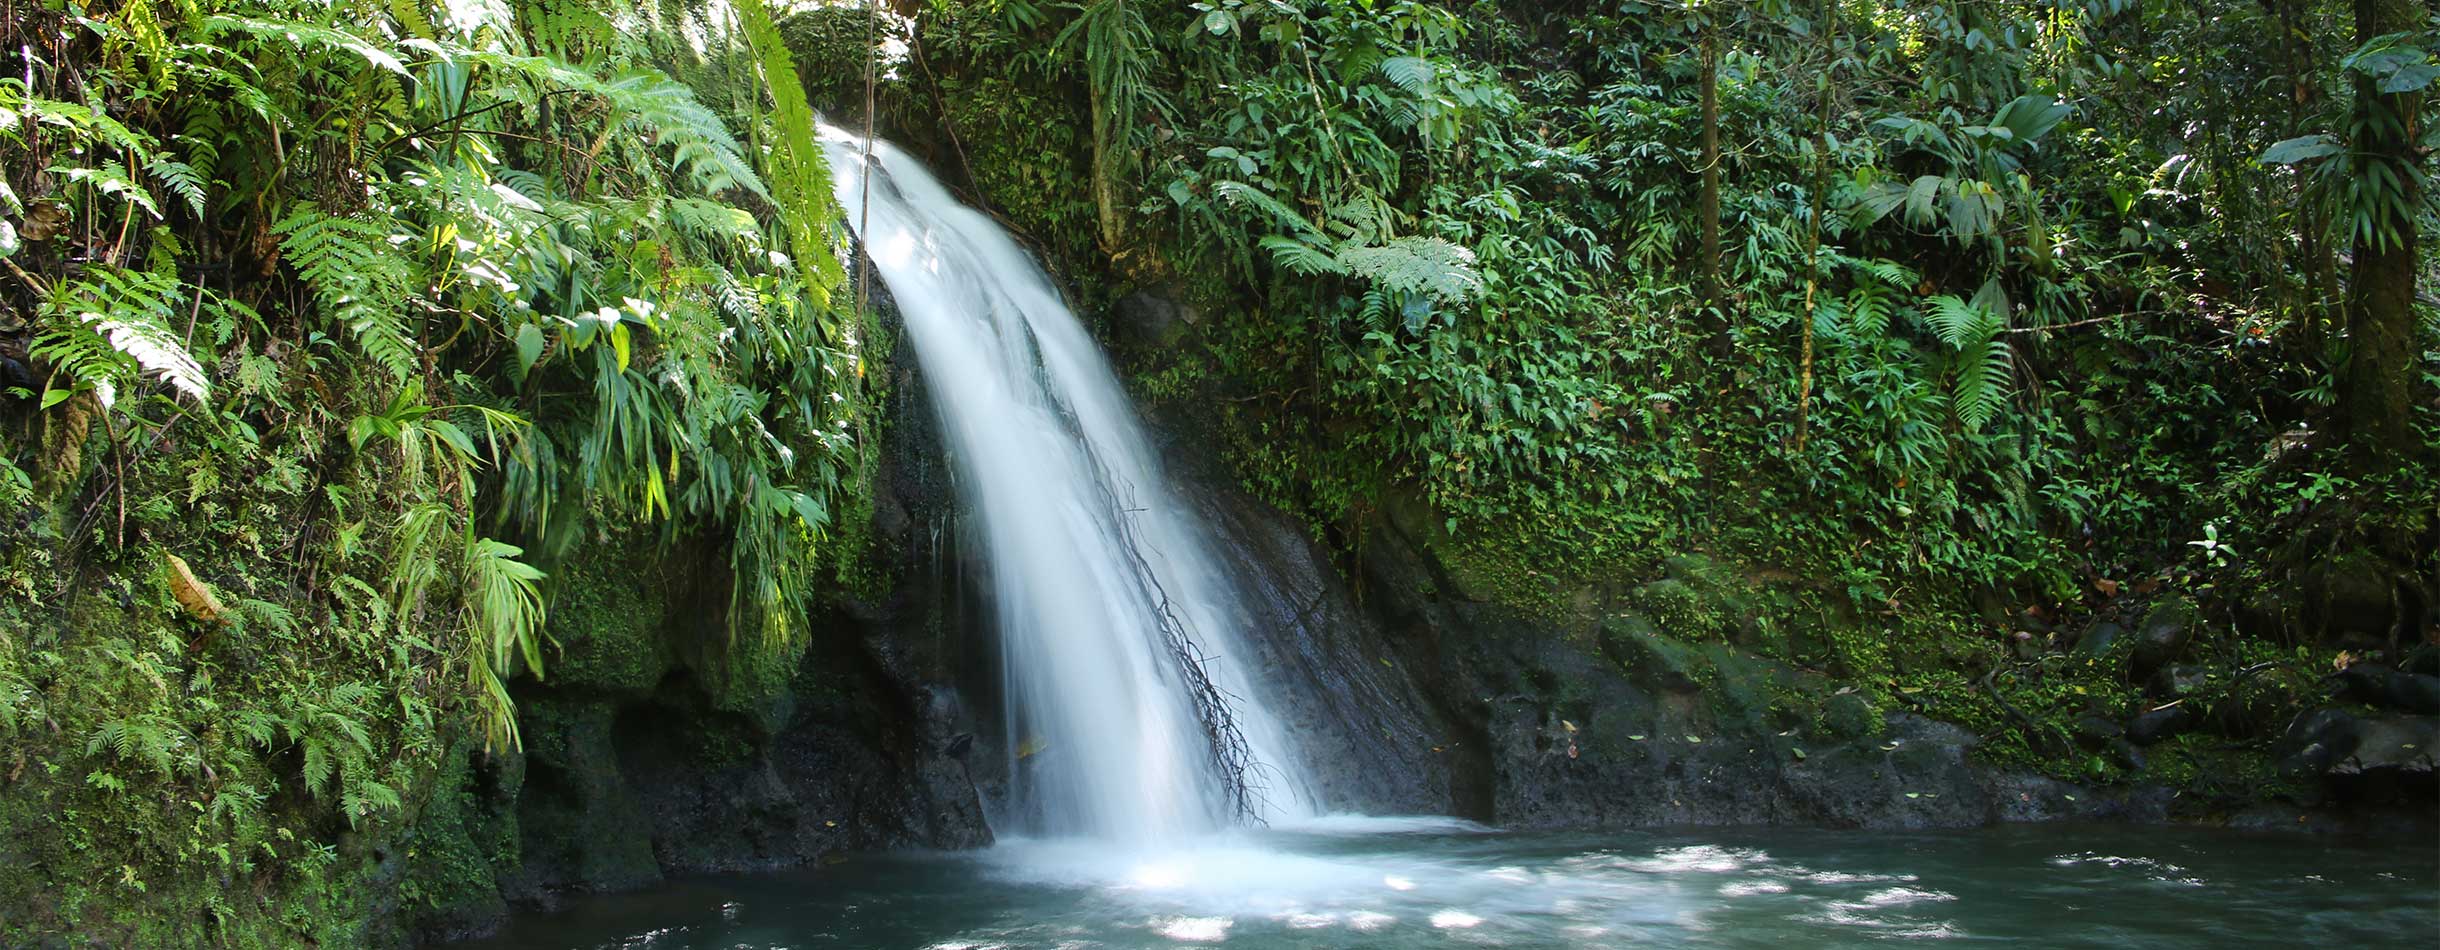 Crayfish Waterfall or La Cascade aux Ecrevisses, Guadeloupe National Park, Guadeloupe